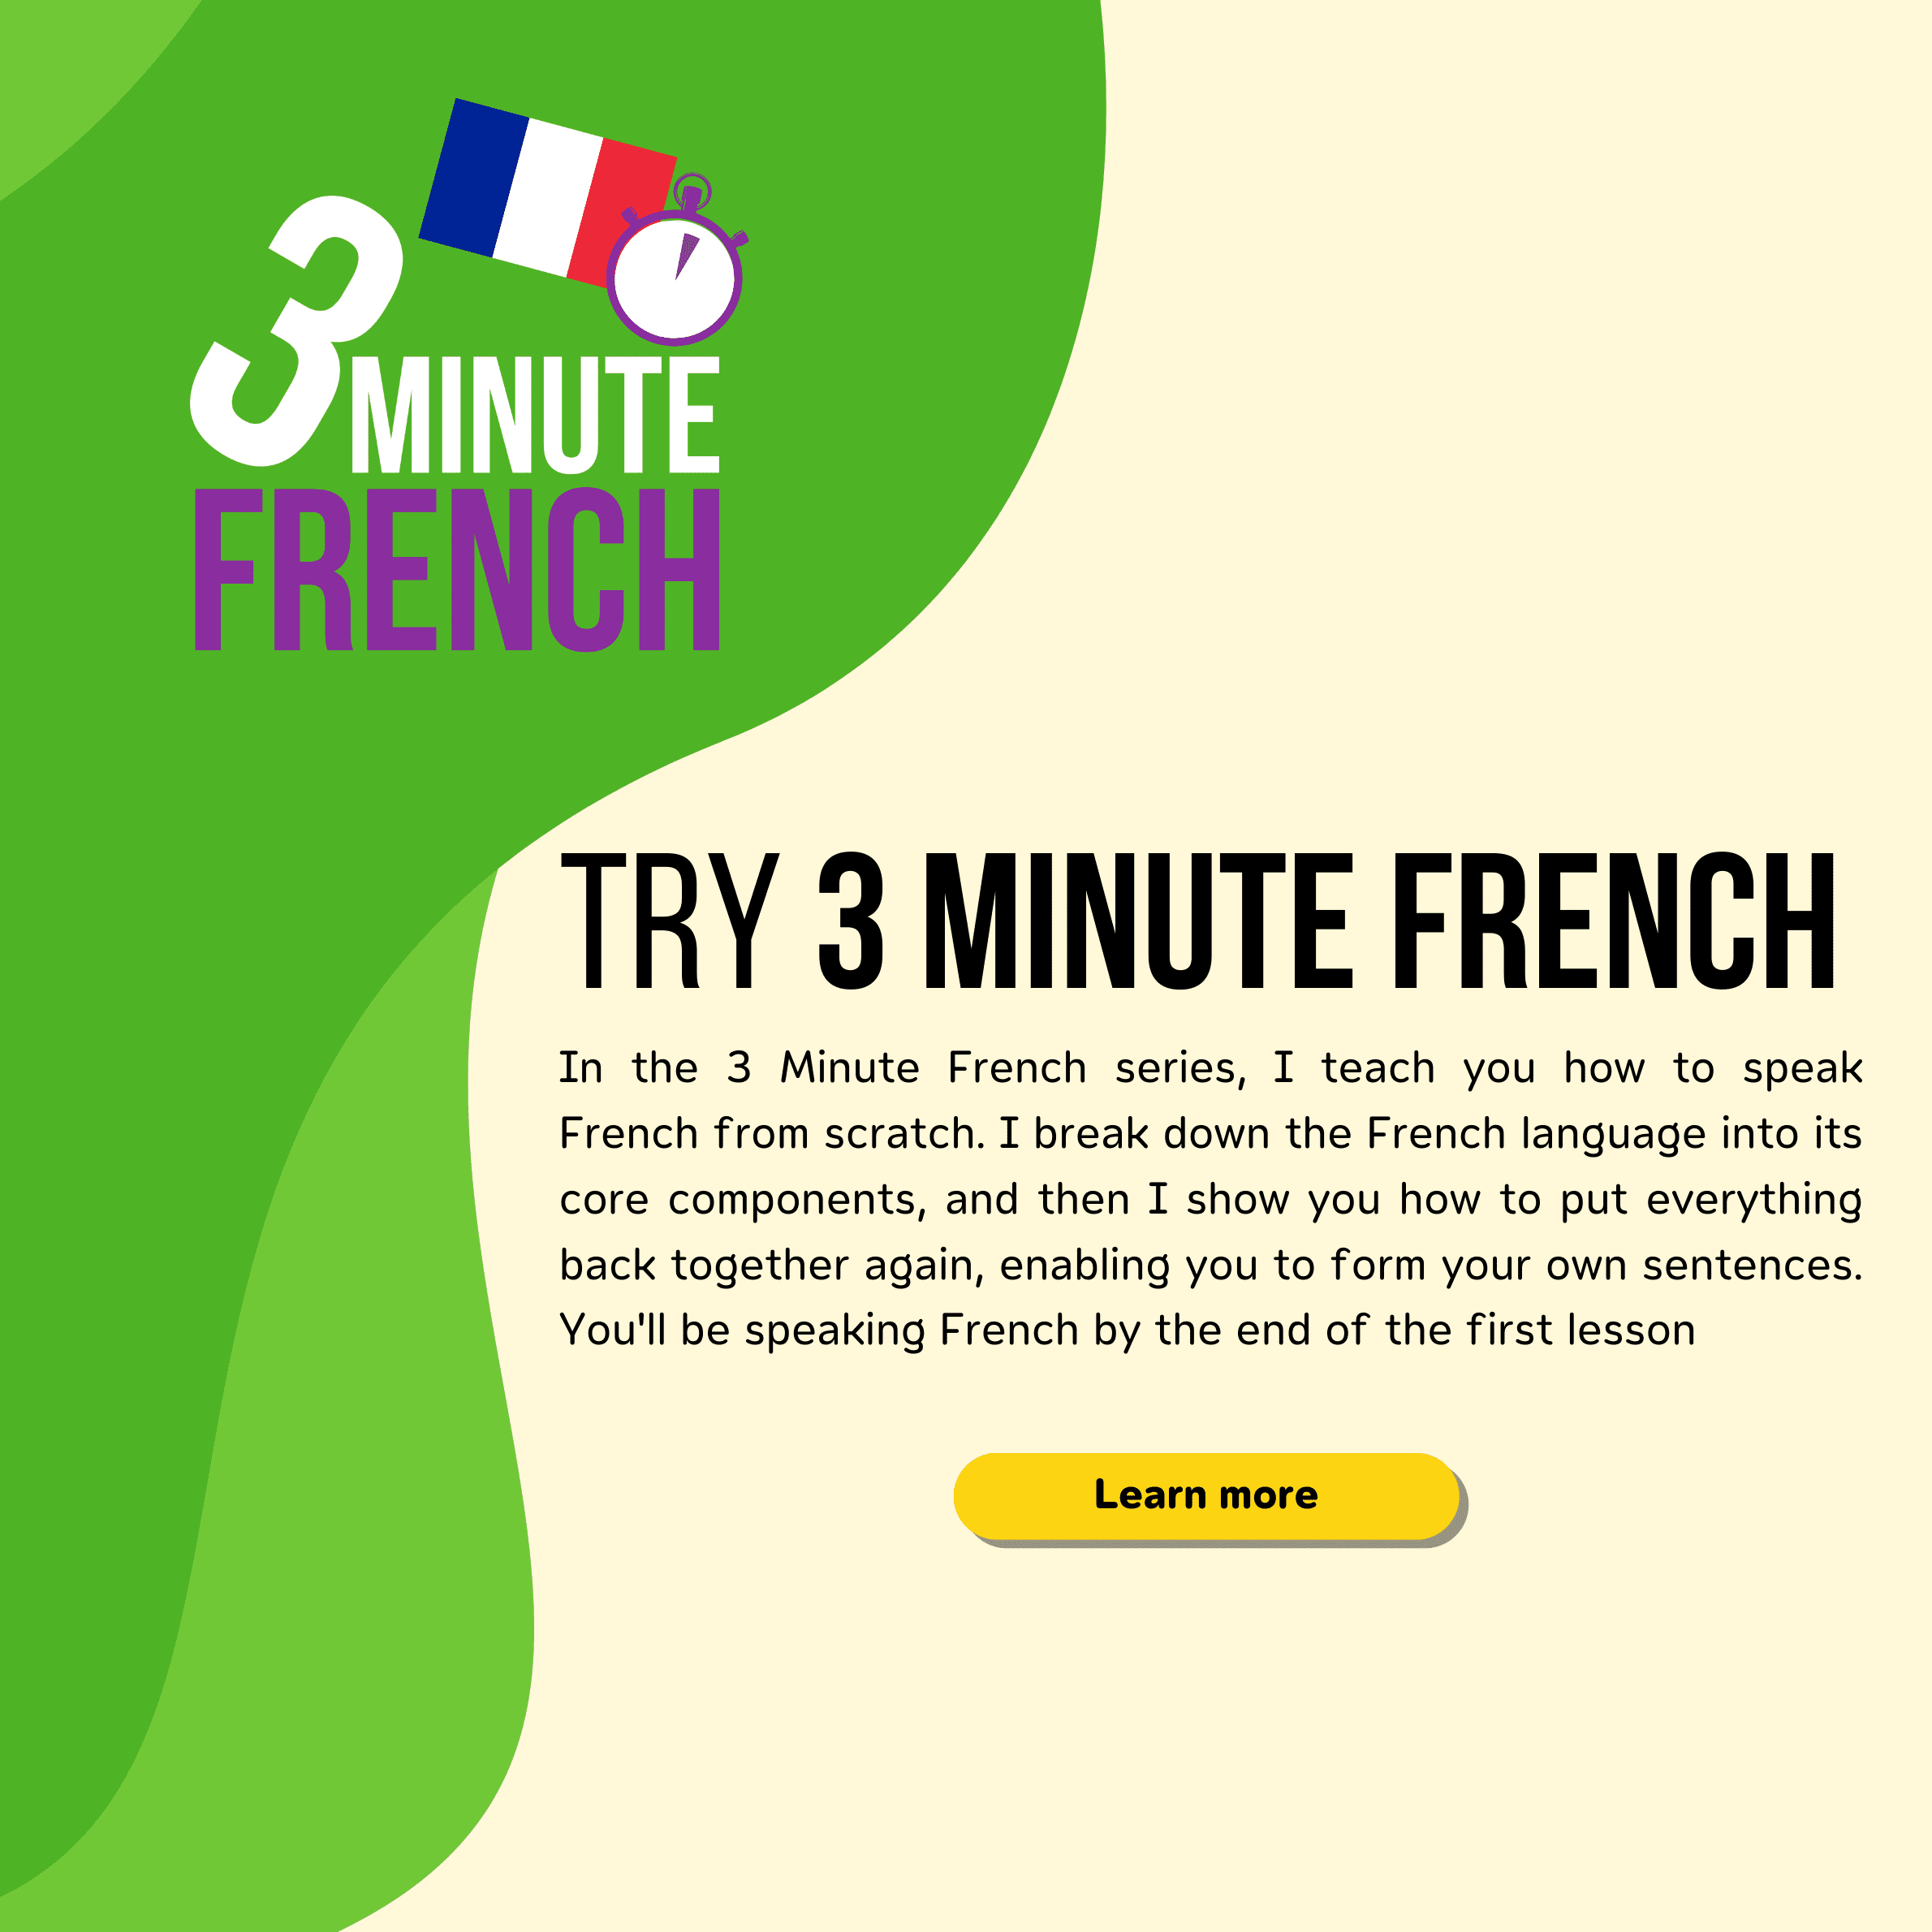 Try 3 Minute French